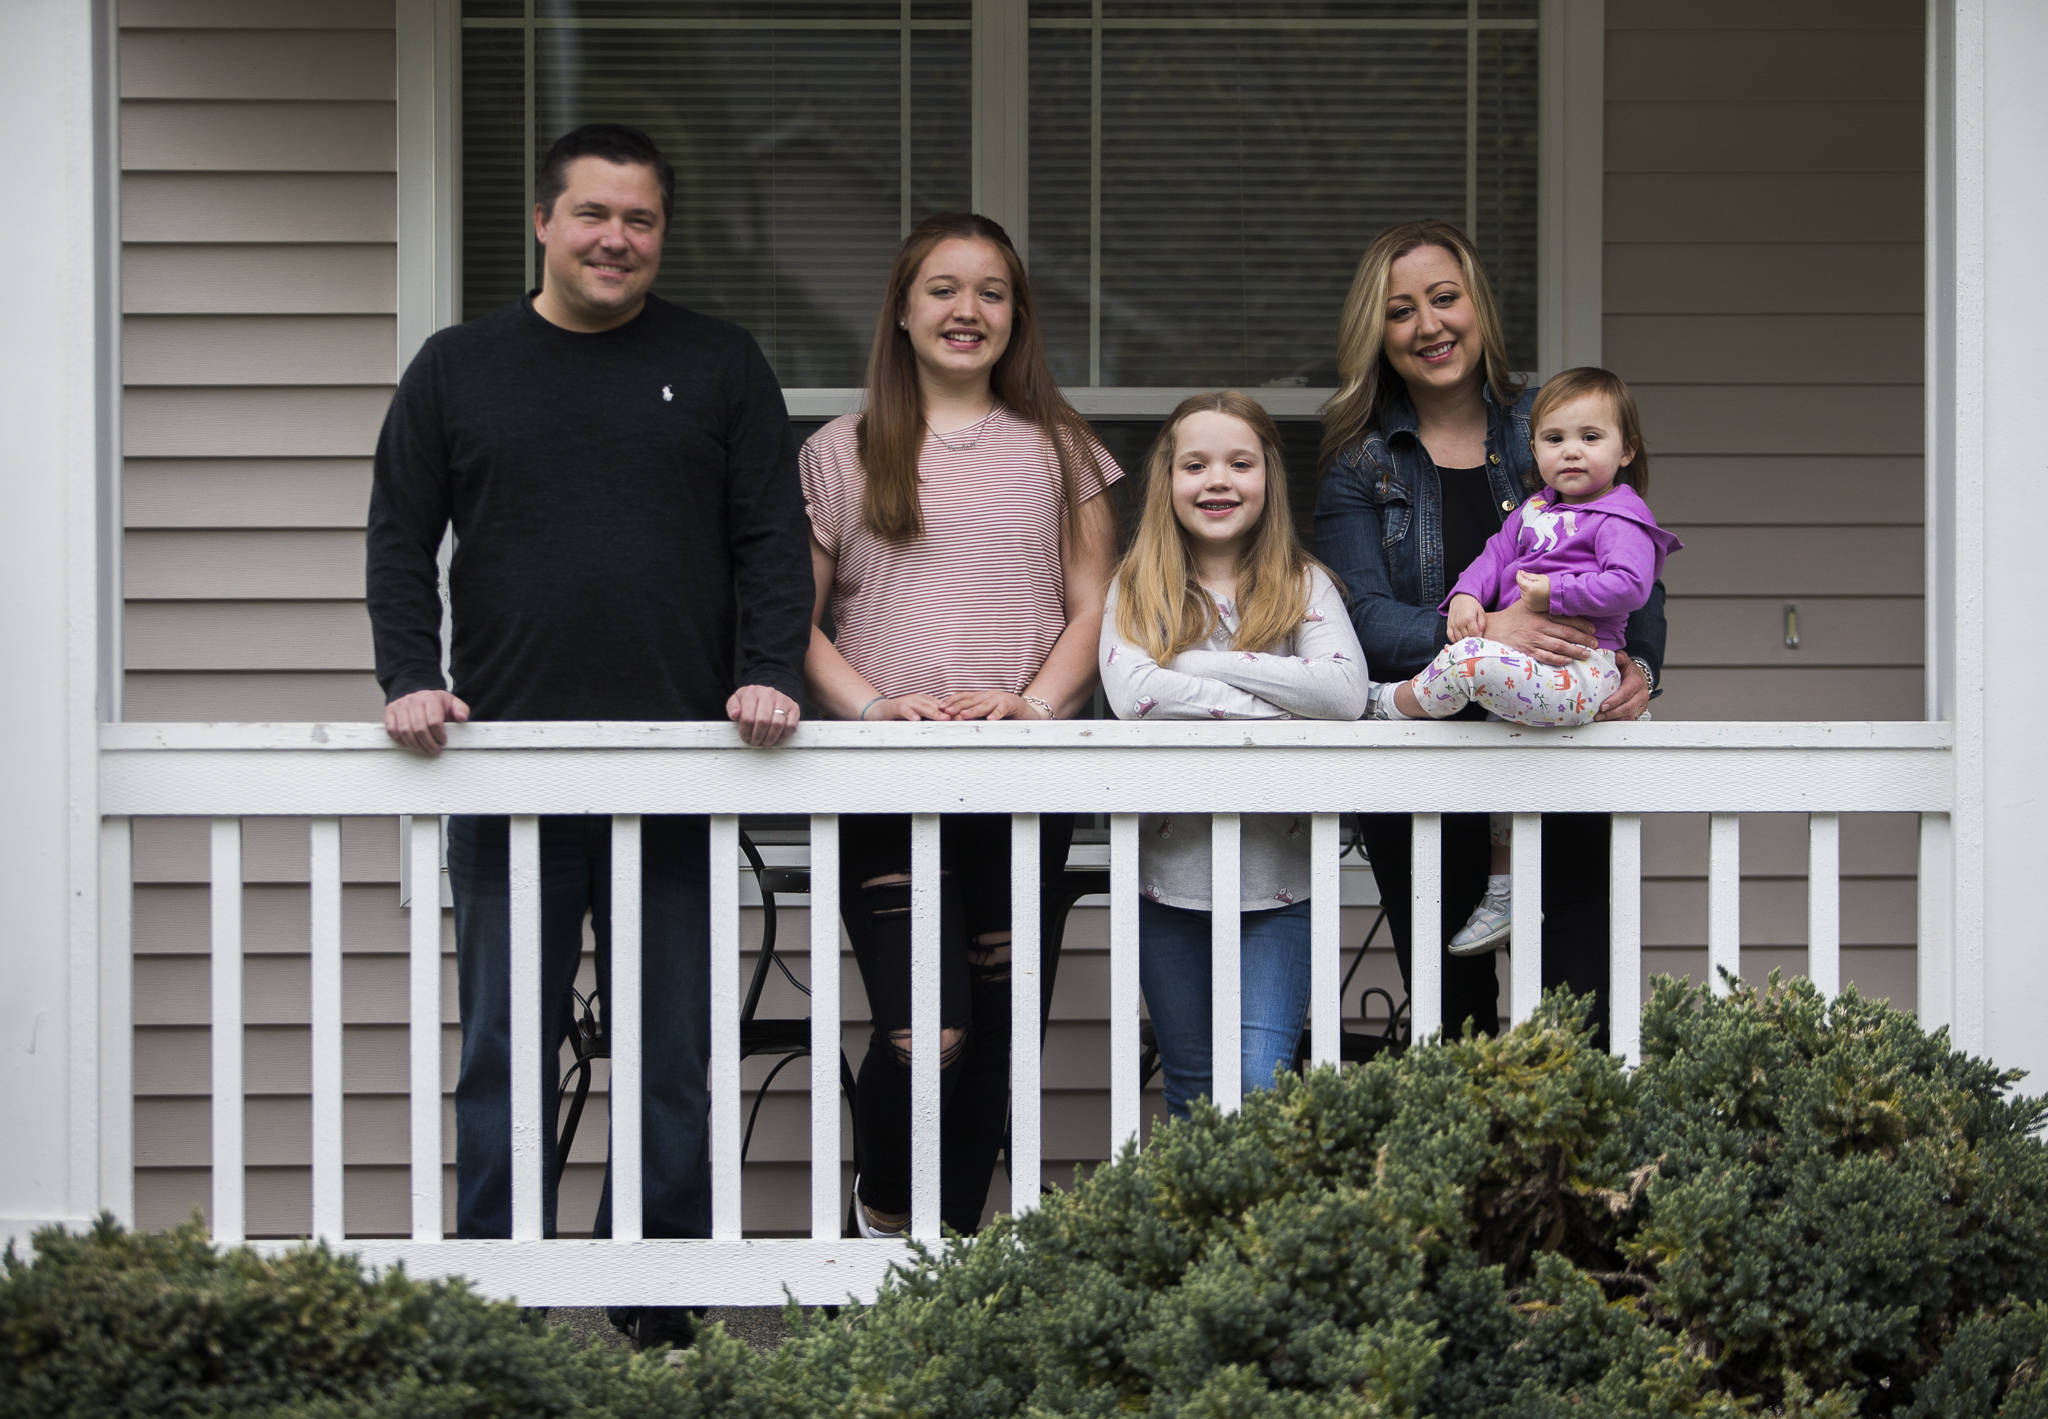 From left: Kris Baier, Kendall Wright, 14, Julia Wright, 9, Kristan Baier and Lily Baier, 1, outside their home in Everett. (Olivia Vanni / The Herald)